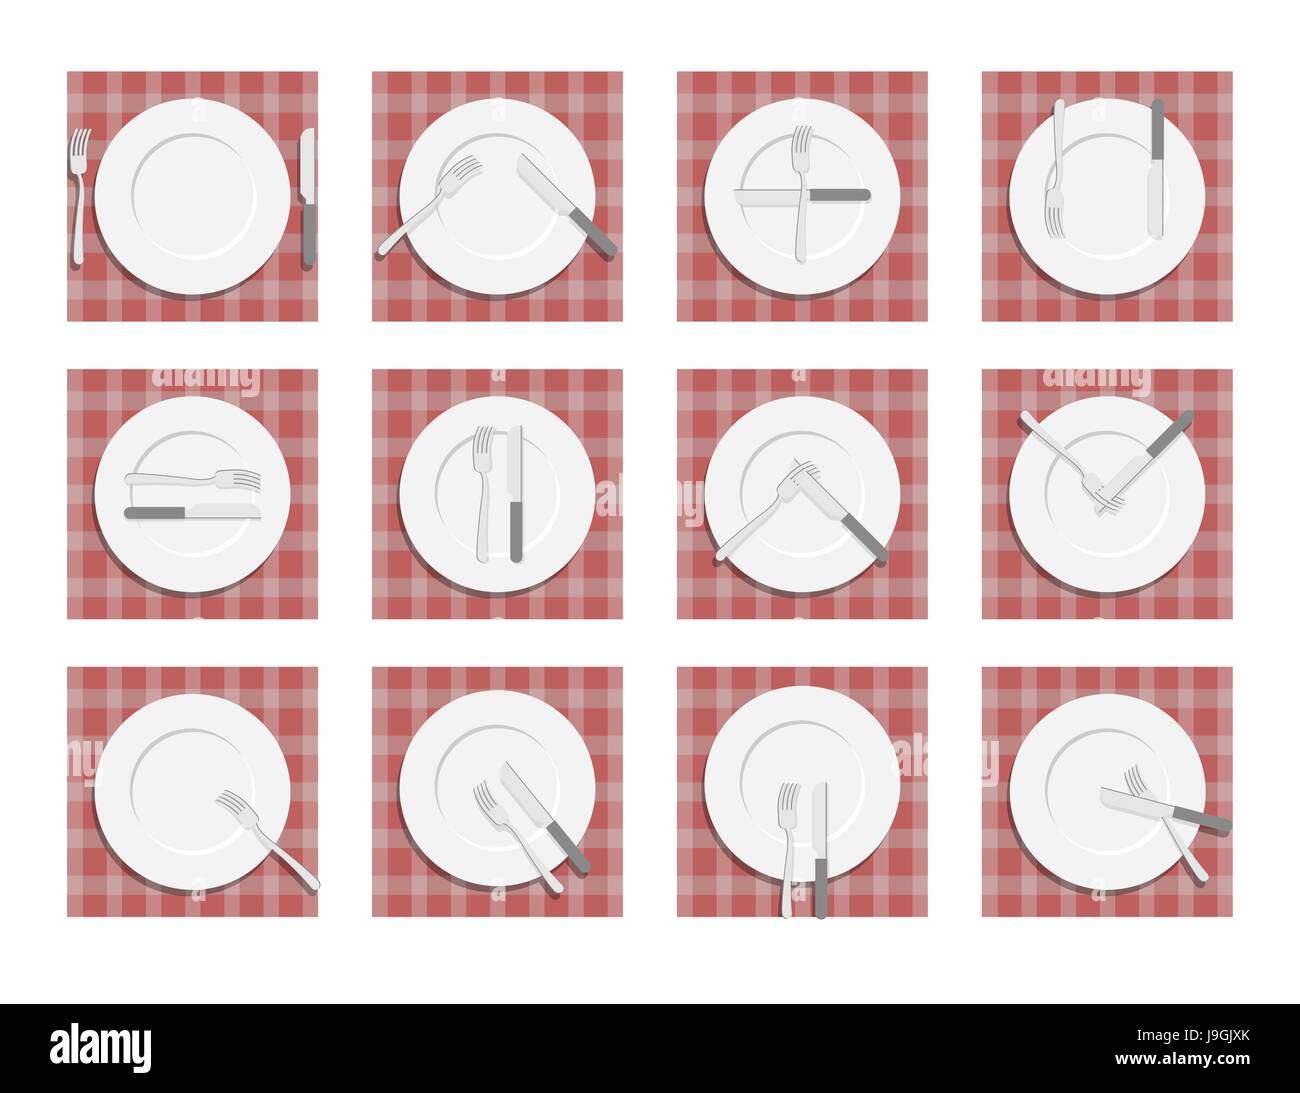 Signs for waiter in the restaurant. Dining etiquette. Cutlery on napkin. Cutlery etiquette. Stock Vector